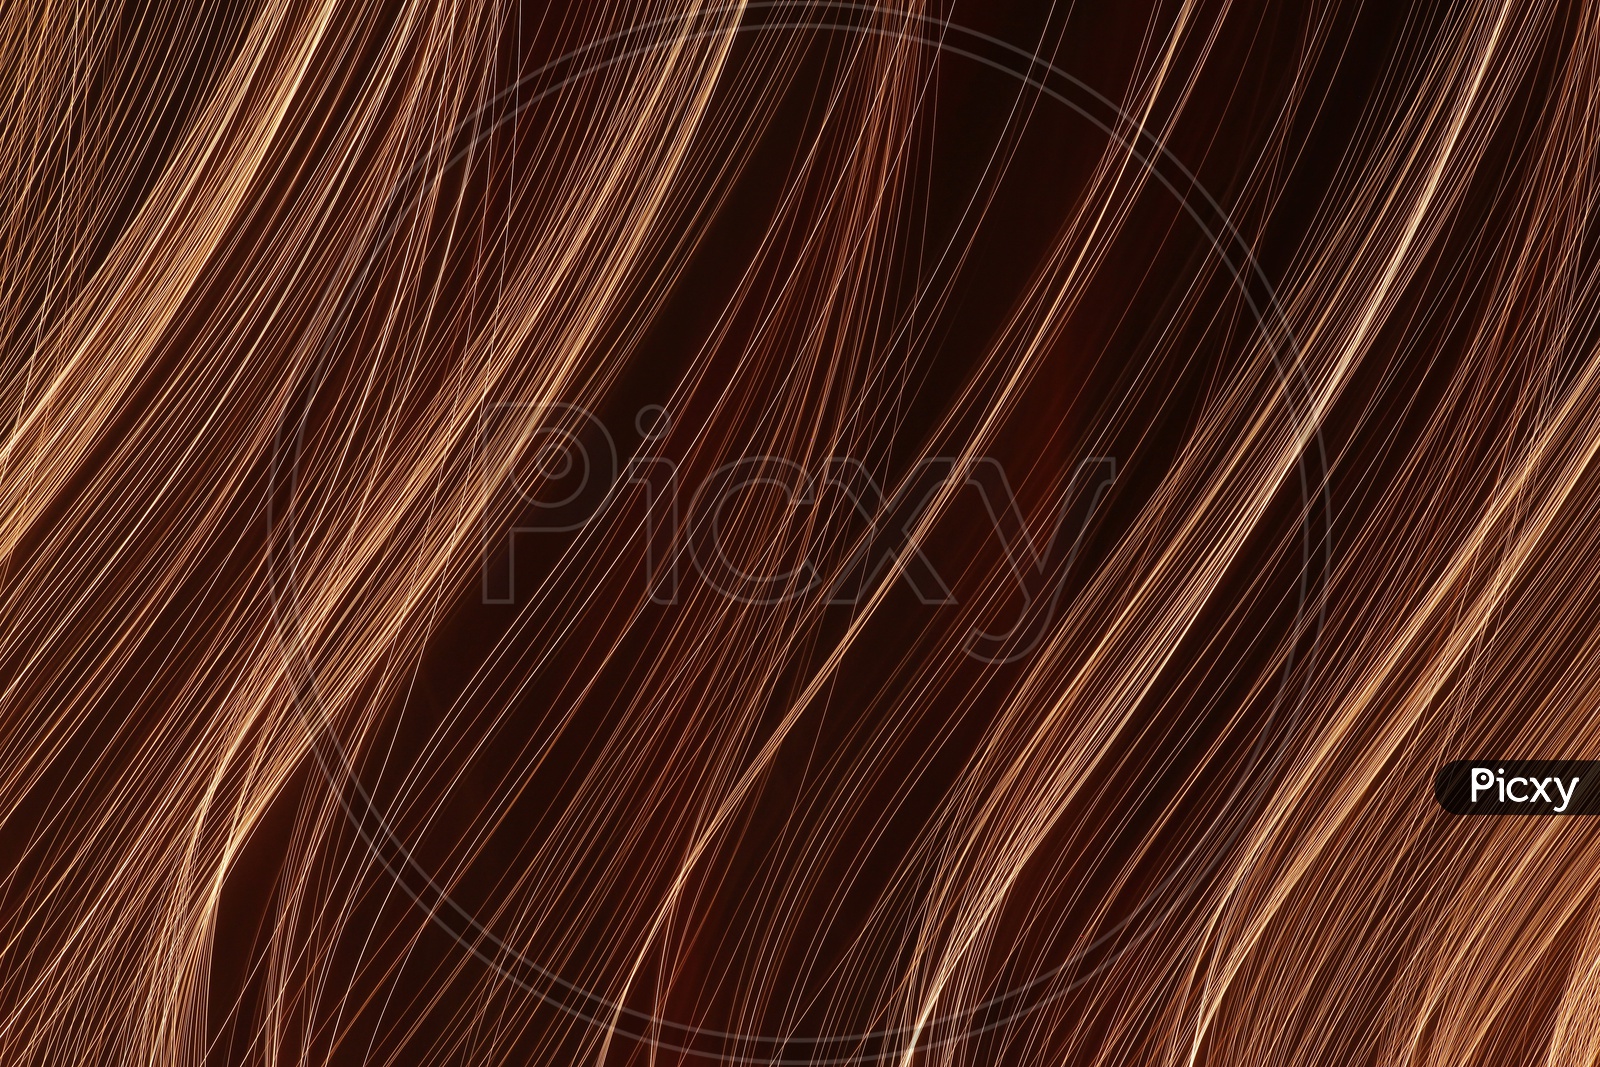 Abstract of light trail pattern with black background